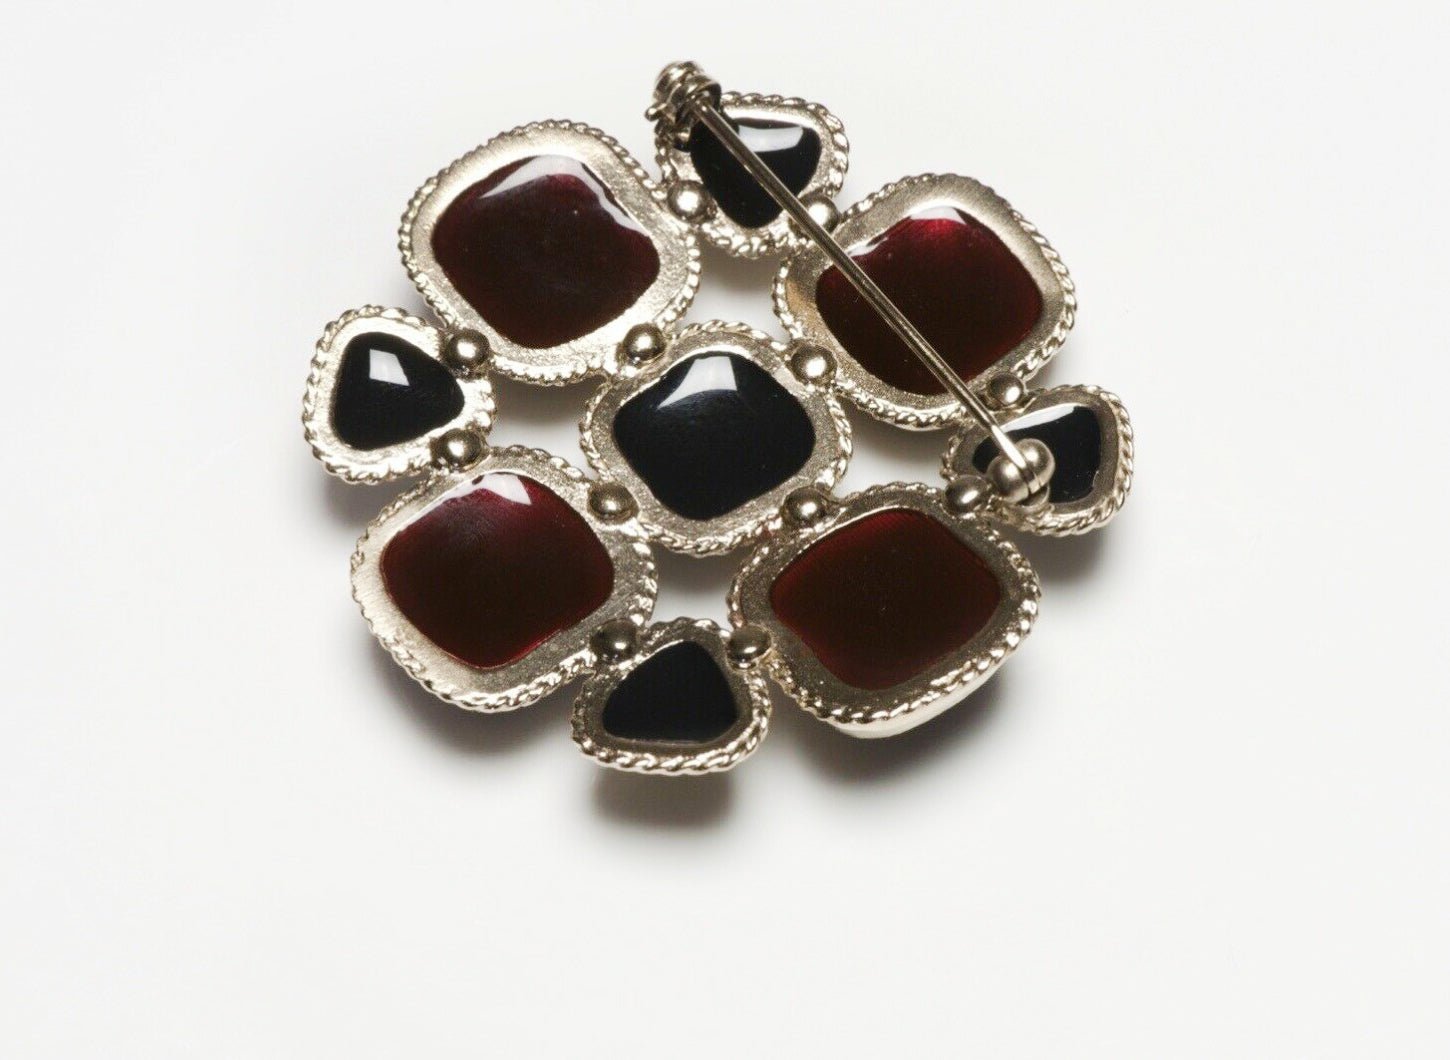 CHANEL Paris Spring 2011 Maison Gripoix Black Red Glass CC Brooch - DSF Antique Jewelry